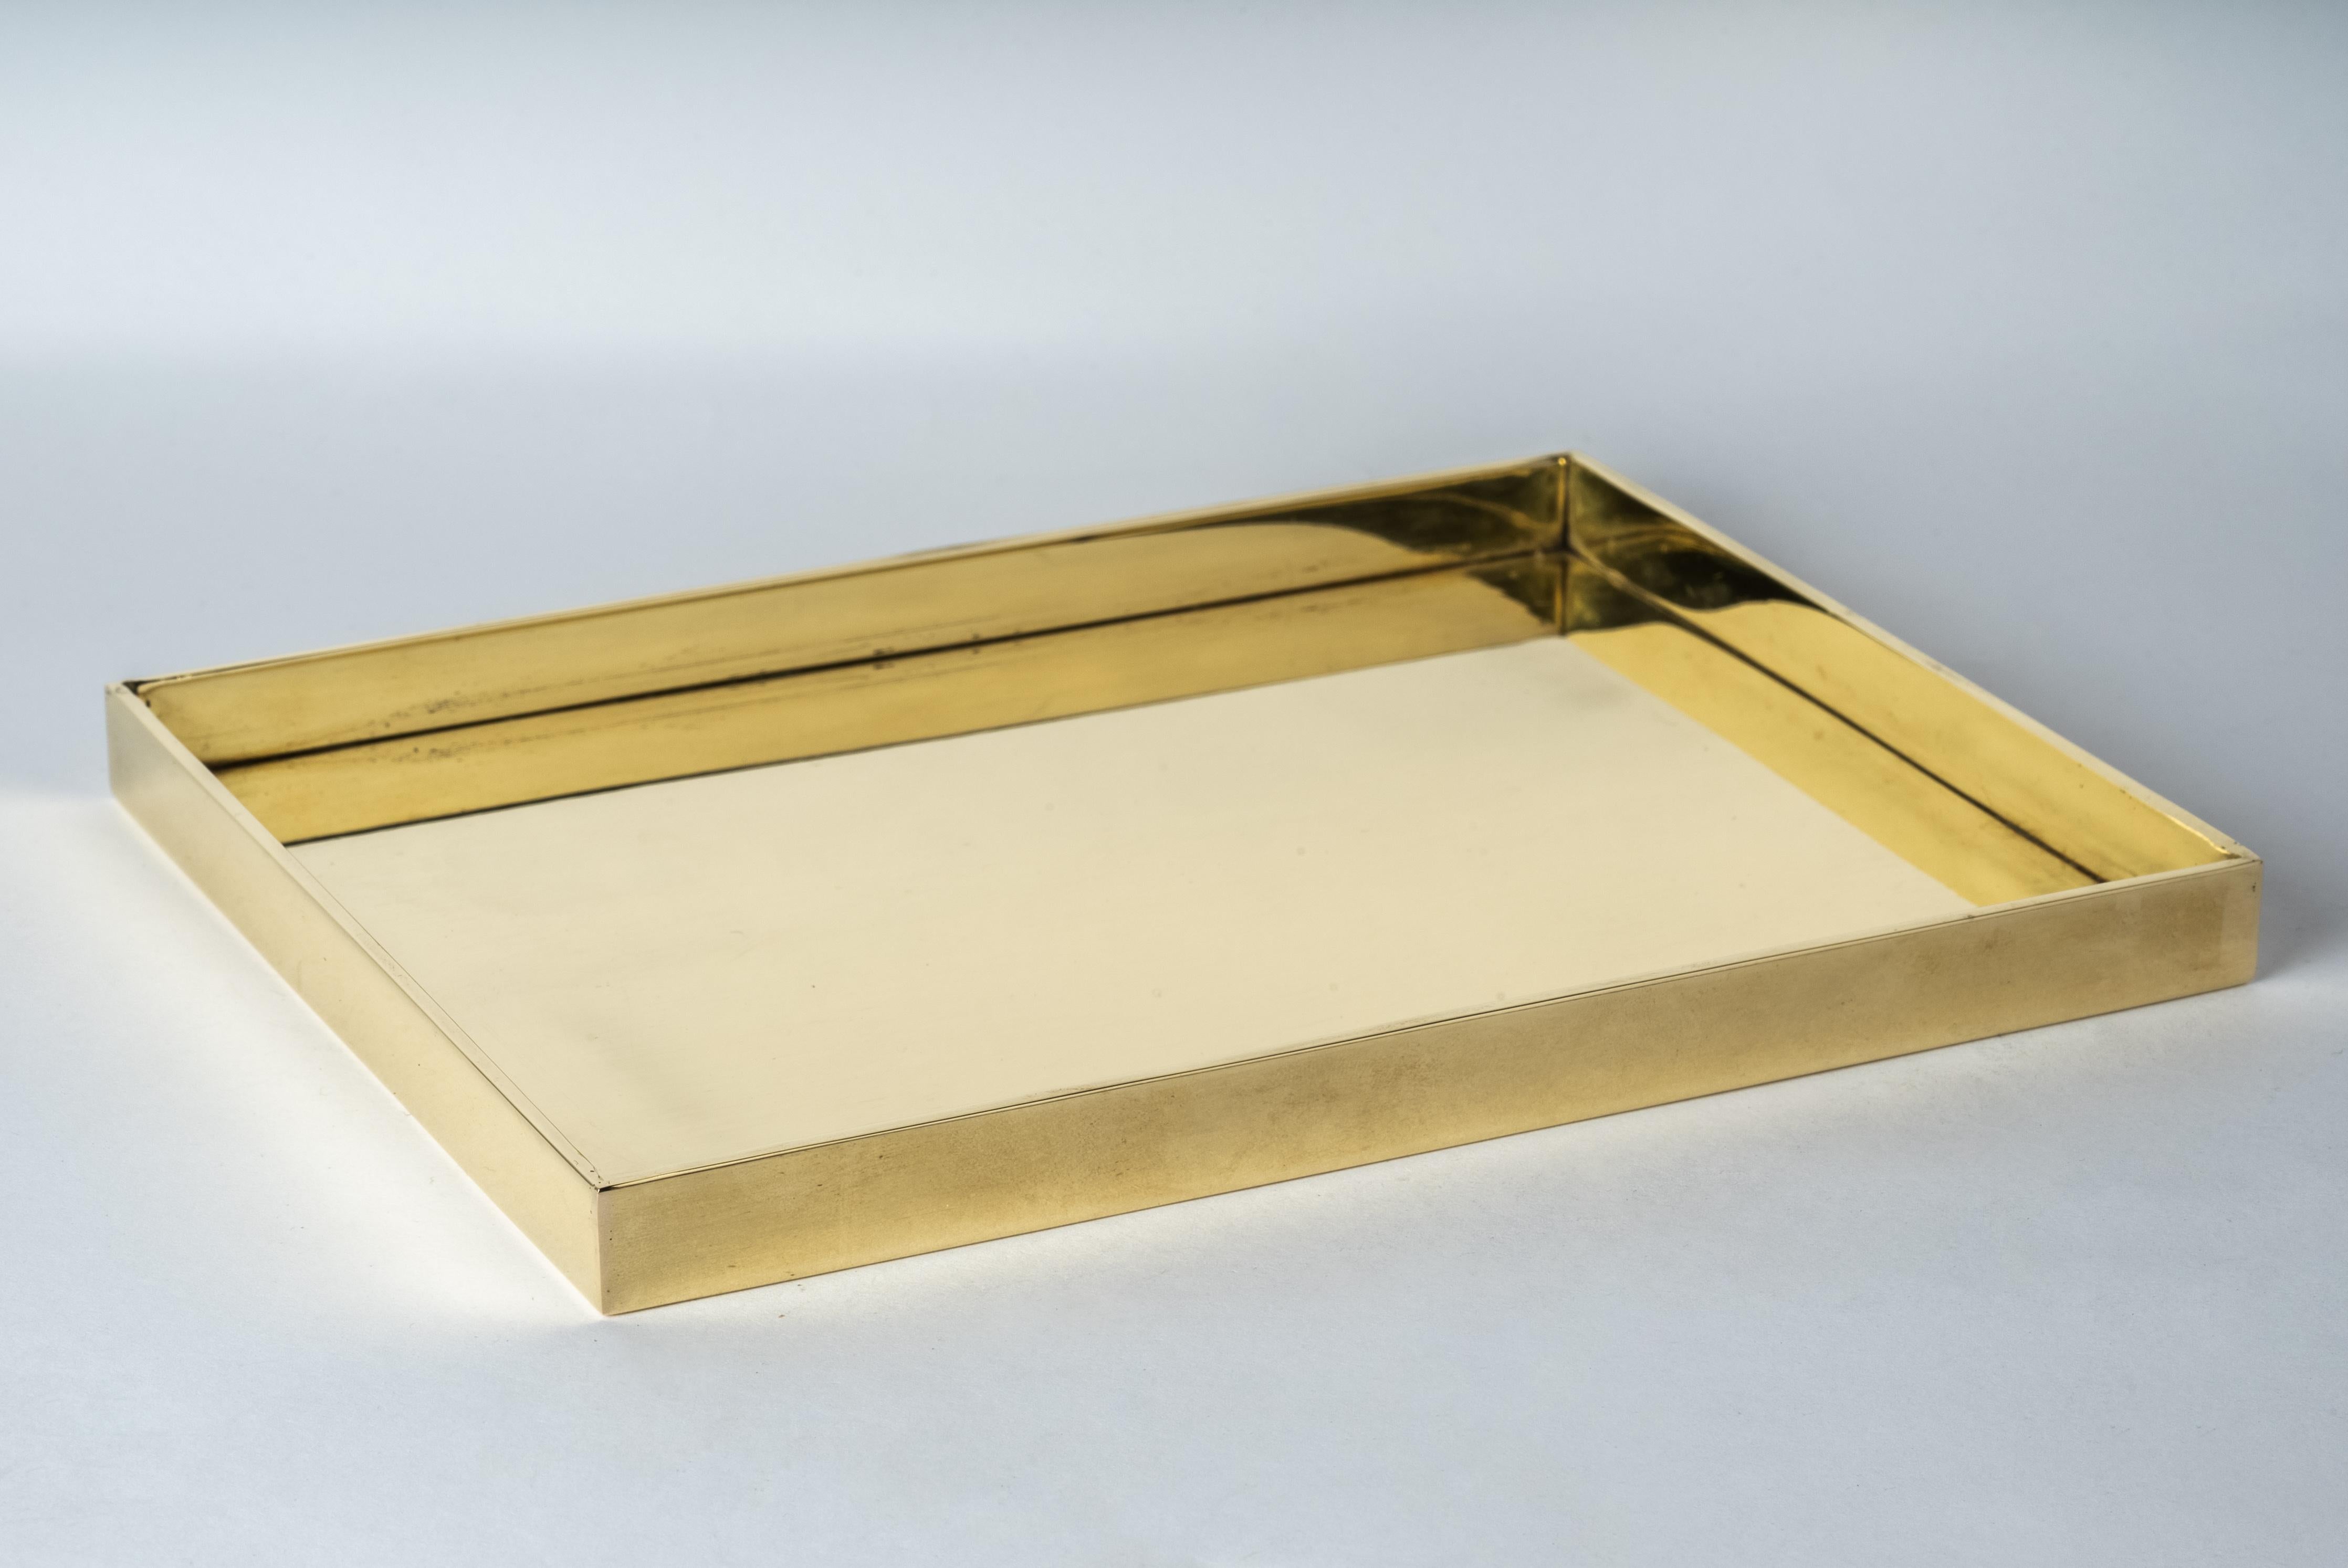 This tray is hand-made in polished brass. Crafted with meticulous care, it is a masterpiece of metalwork. Every inch is a testament to artisanal skill, with each section cut and shaped by hand.